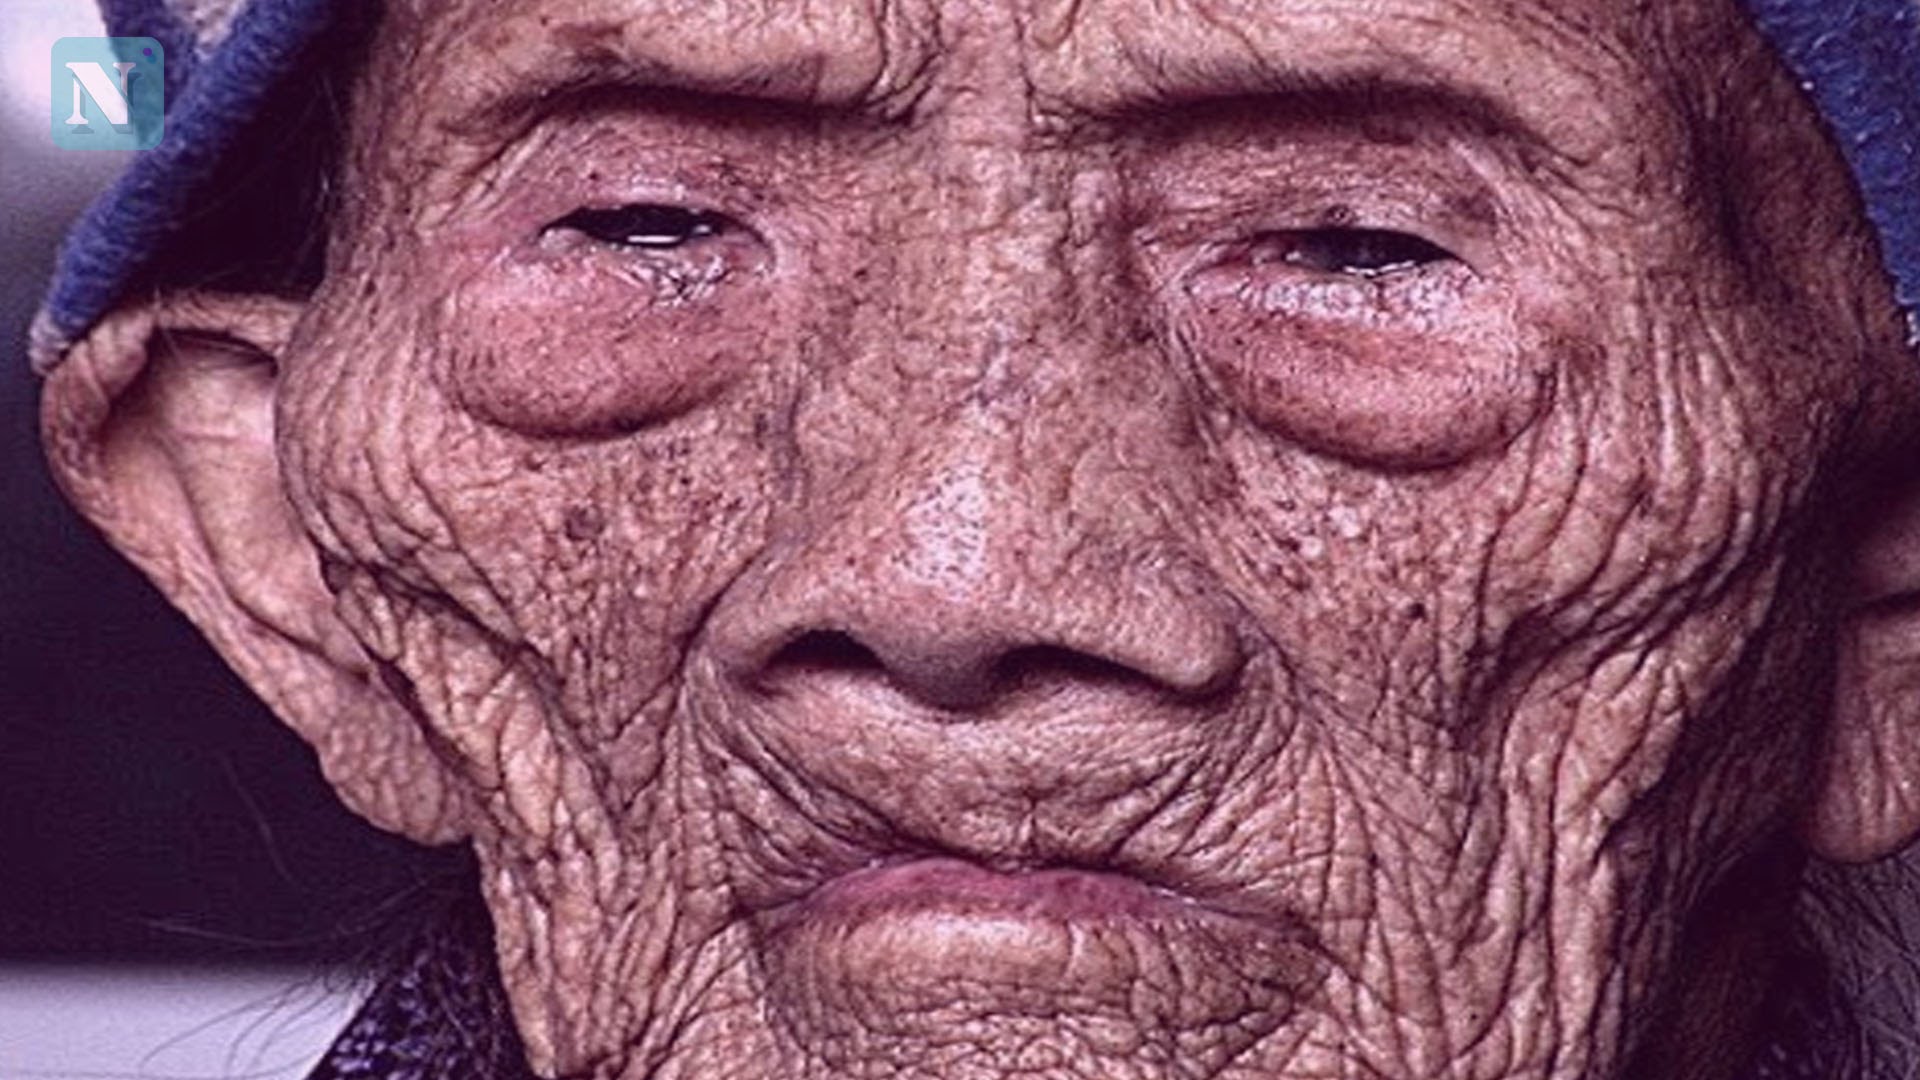 Li Ching Yuen Oldest Living Man Reveals His Secrets to Longevity Before Death at Age 256 The